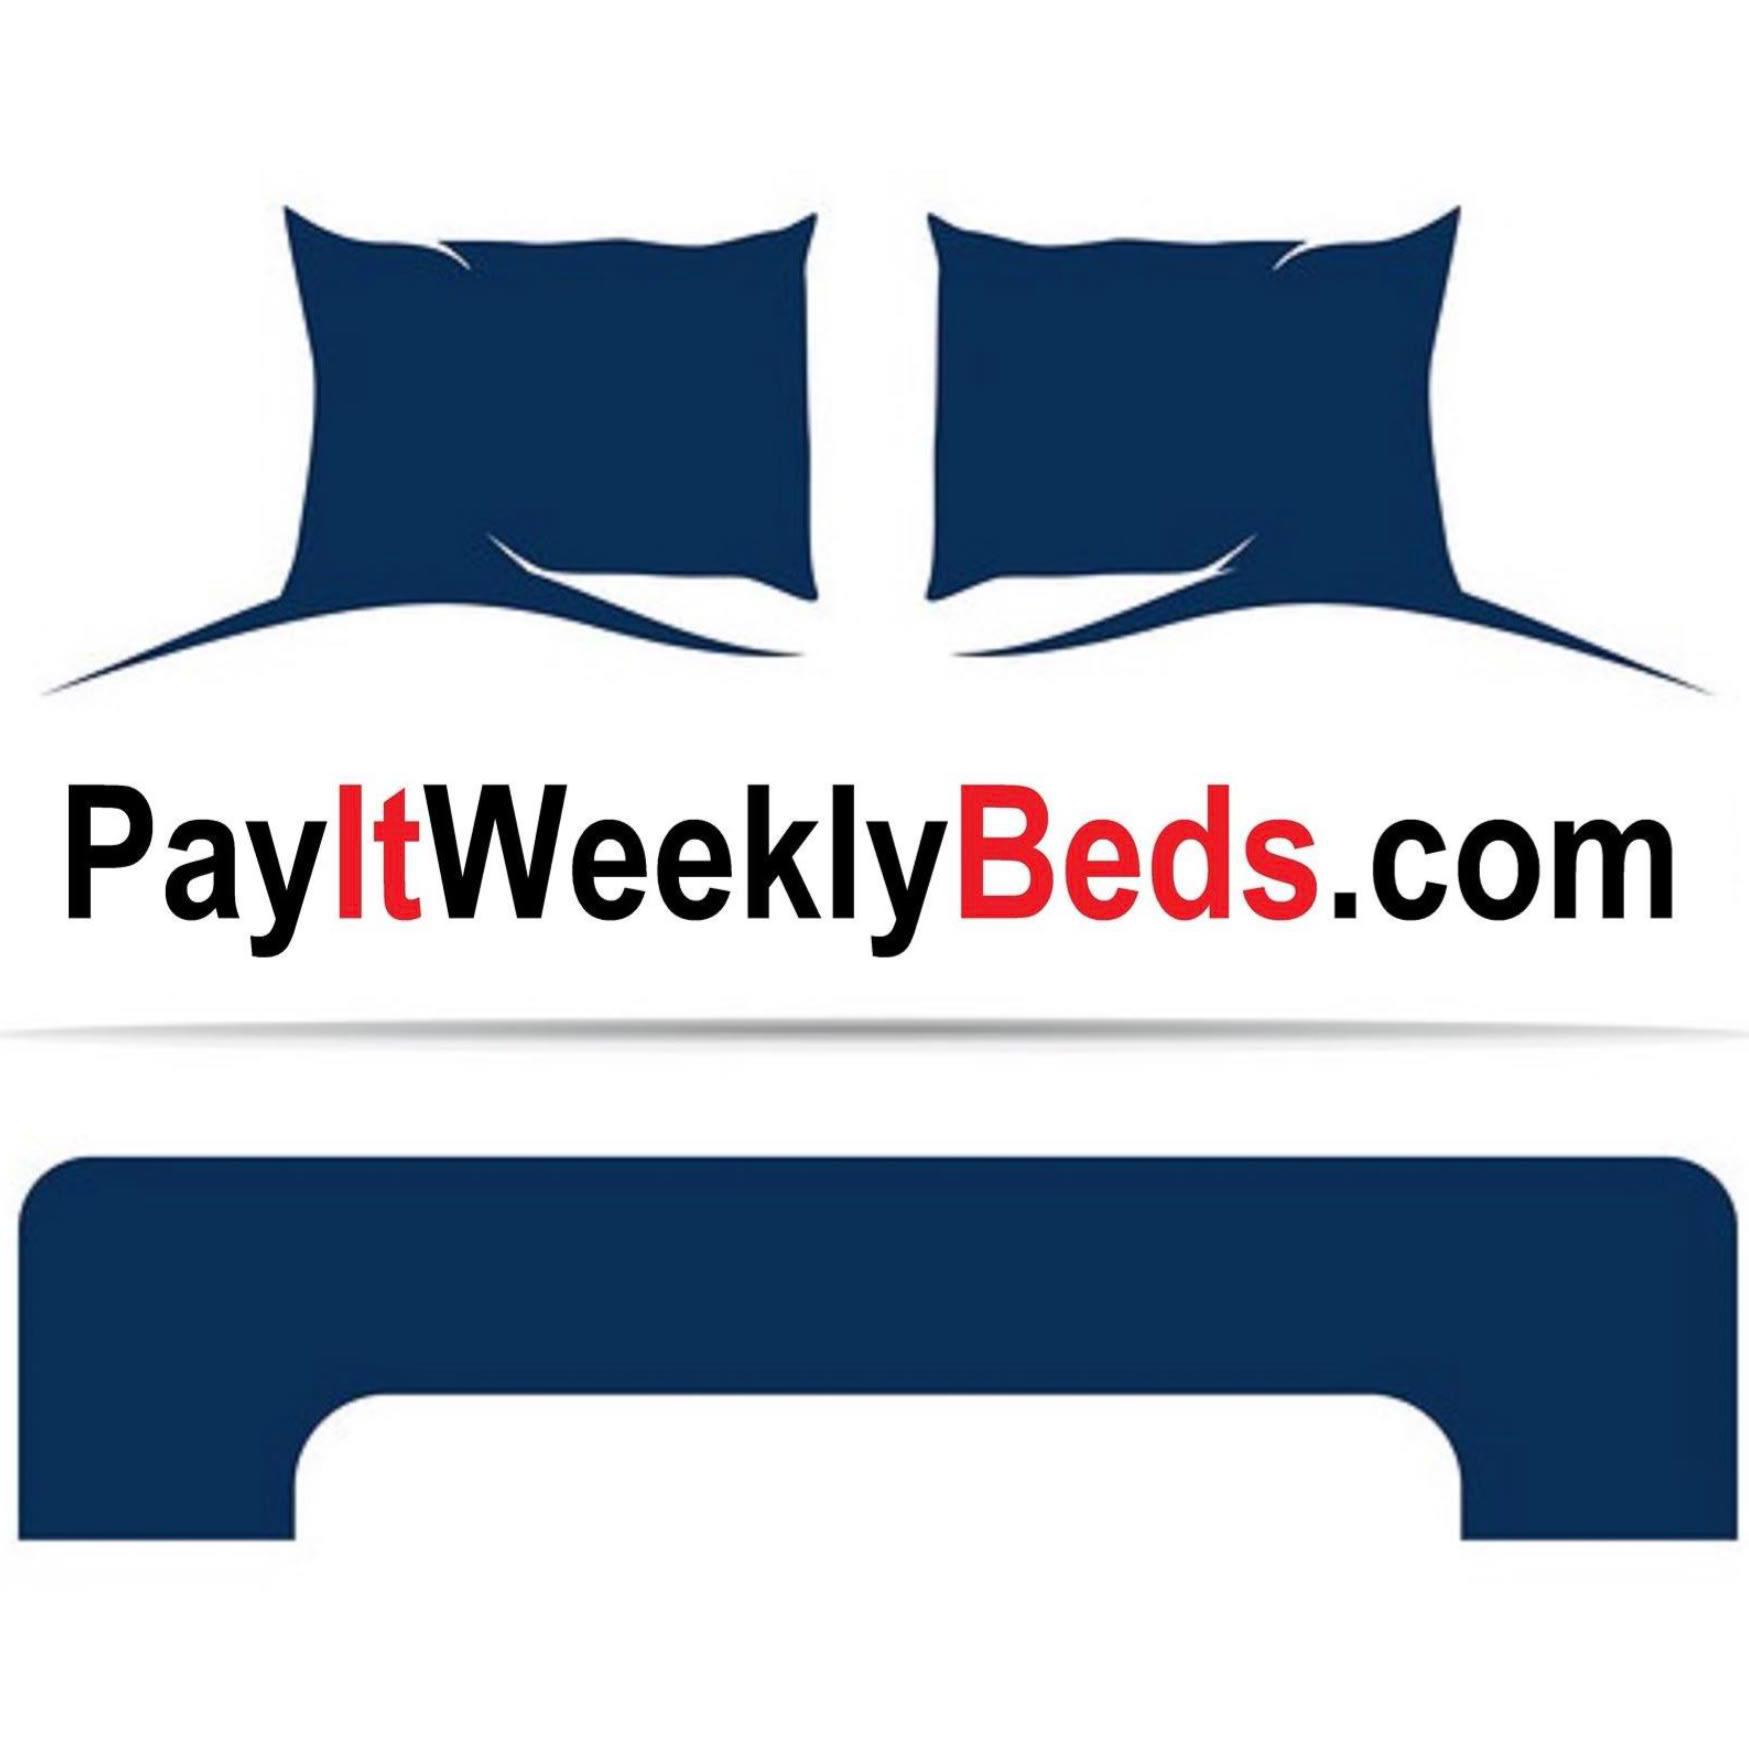 Pay it weekly beds Logo